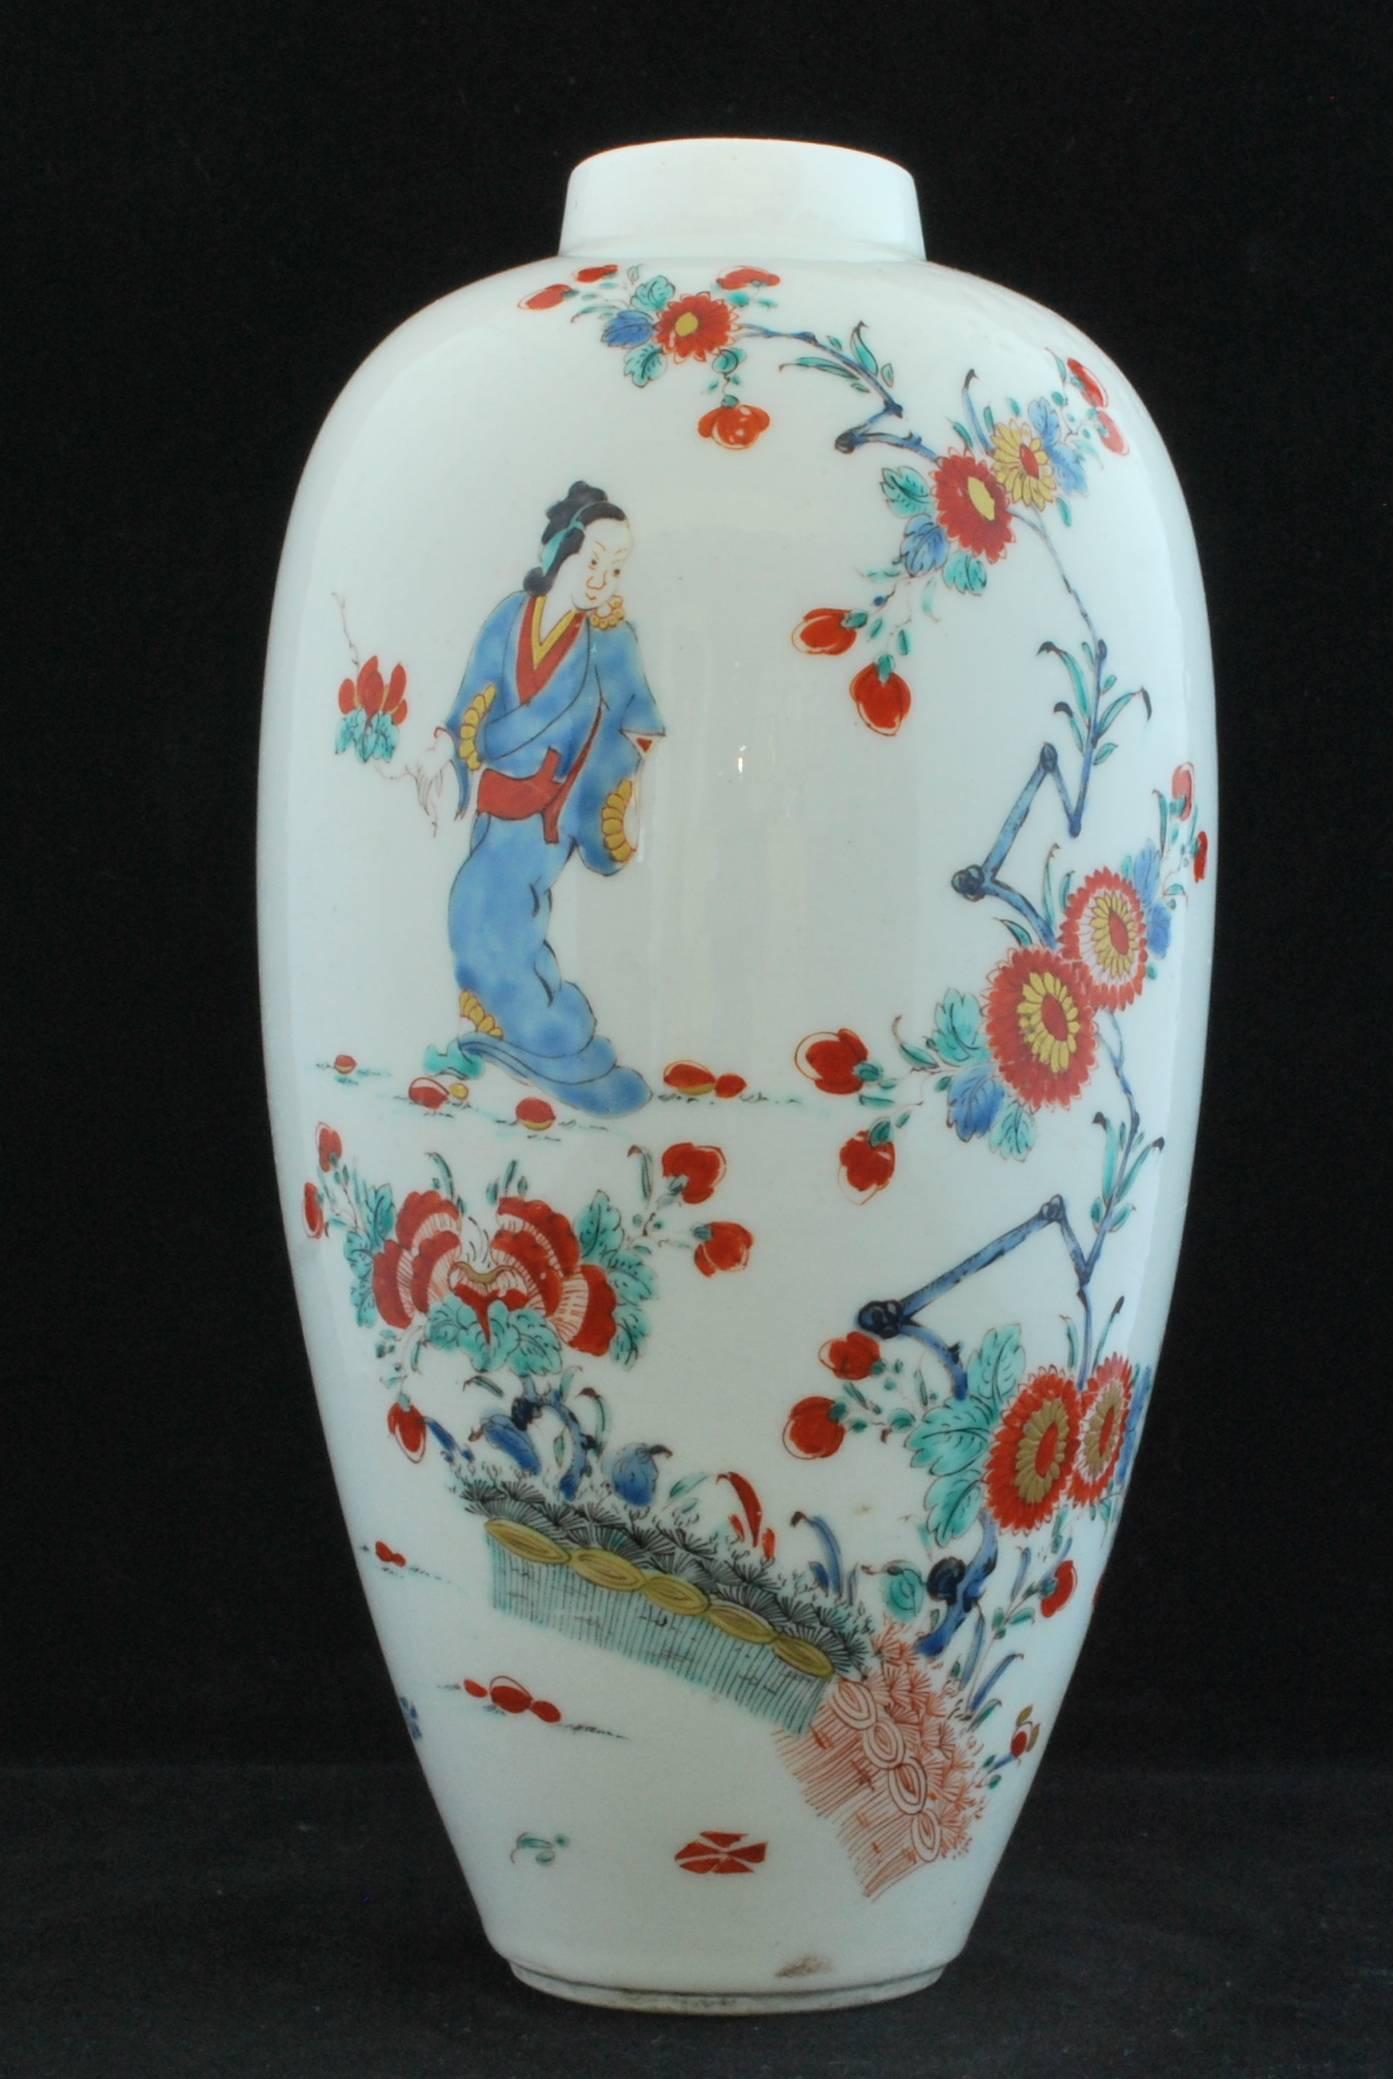 Of elongated high shouldered ovoid form with cylindrical neck after a traditional meiping (prunus vase). Painted in a Kakiemon palette with a lady in a kimono, a flowering branch from banded hedges, flower sprays and flowerheads.

Provenance: